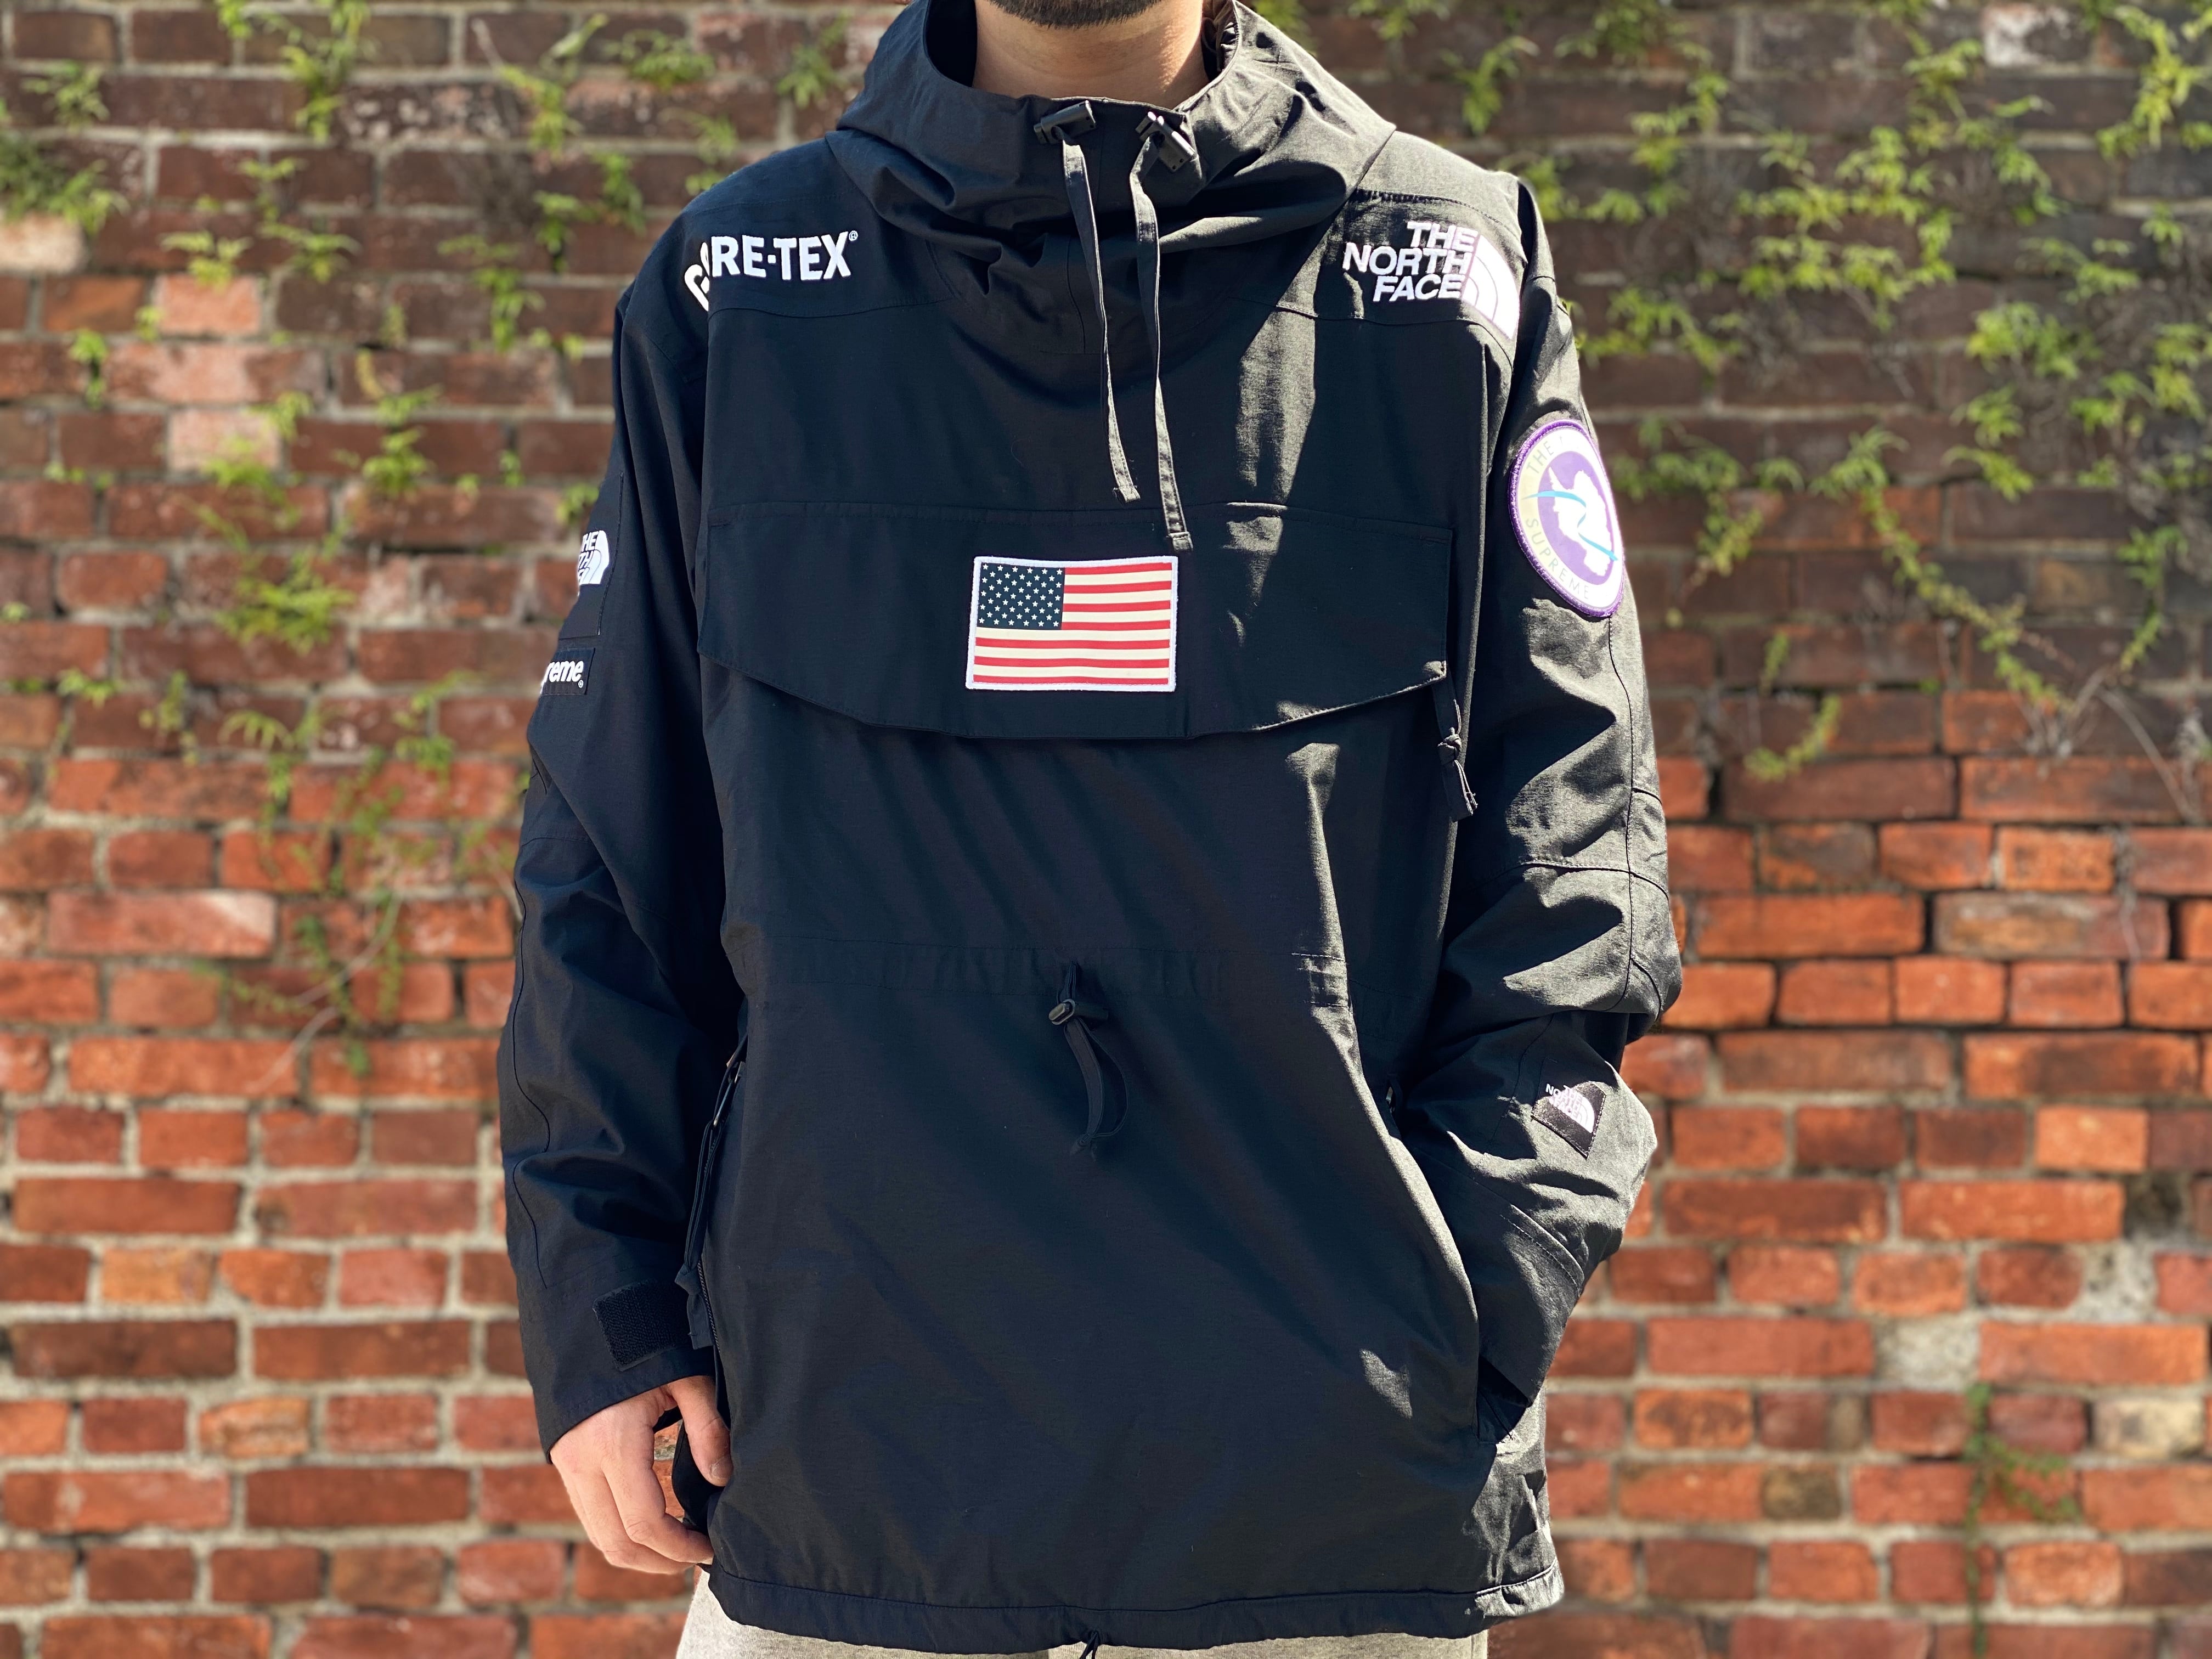 Supreme®/The North Face® Expedition